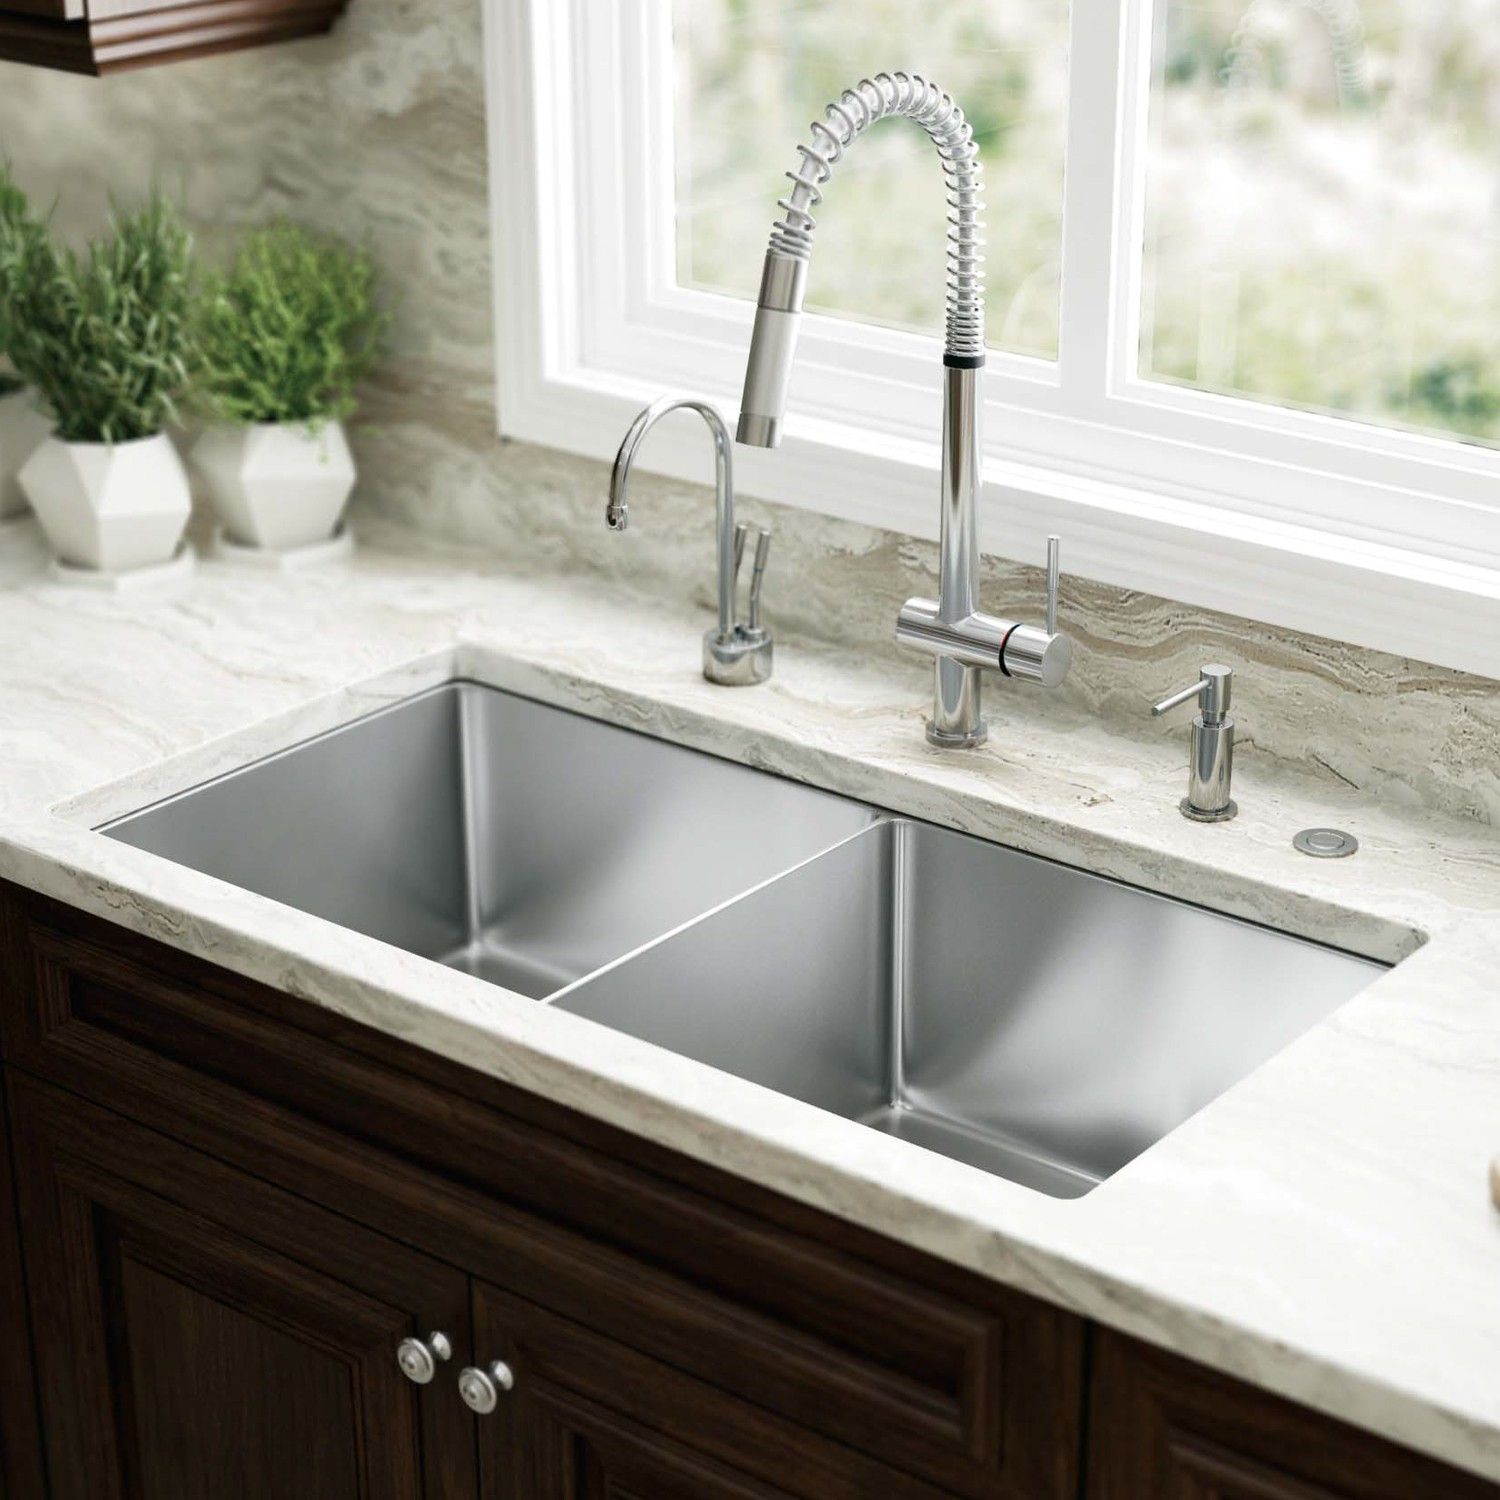 With simple form and sleek aesthetics, the Professional Deep Single Bowl Undermount  Kitchen Sink will